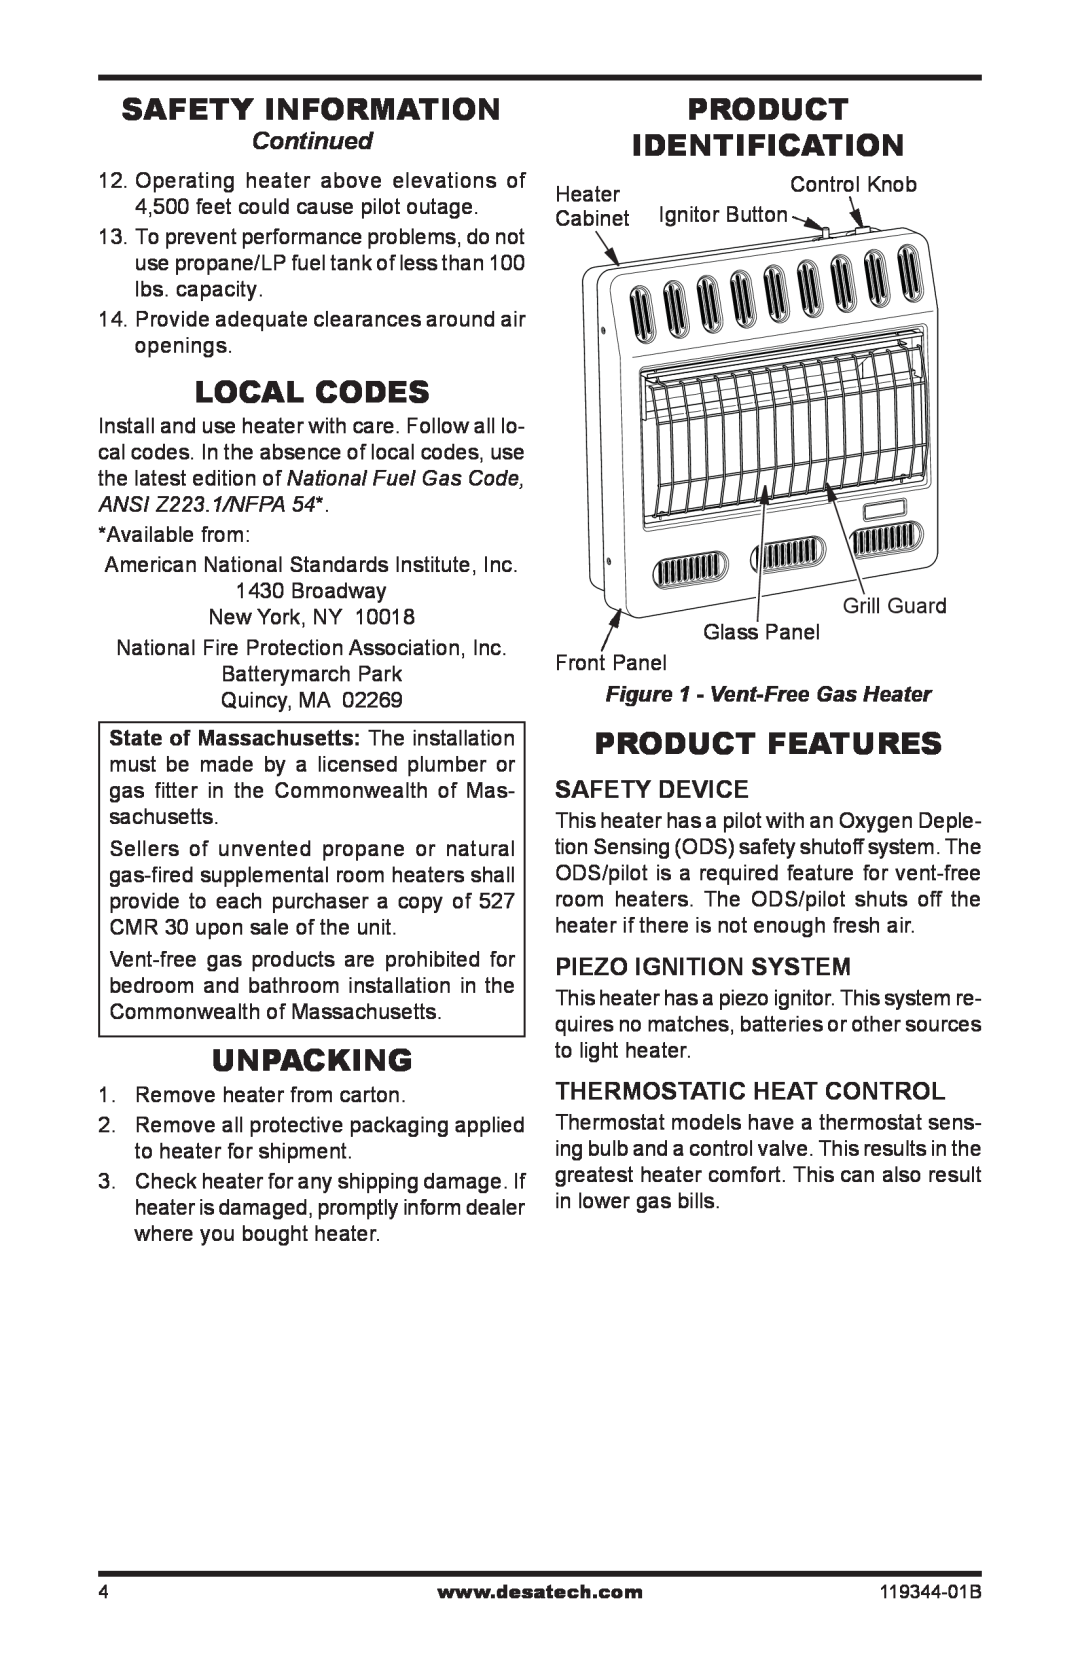 Desa WMP20A Safety Information, Local Codes, Unpacking, Product Identification, Product Features, Continued, Safety Device 